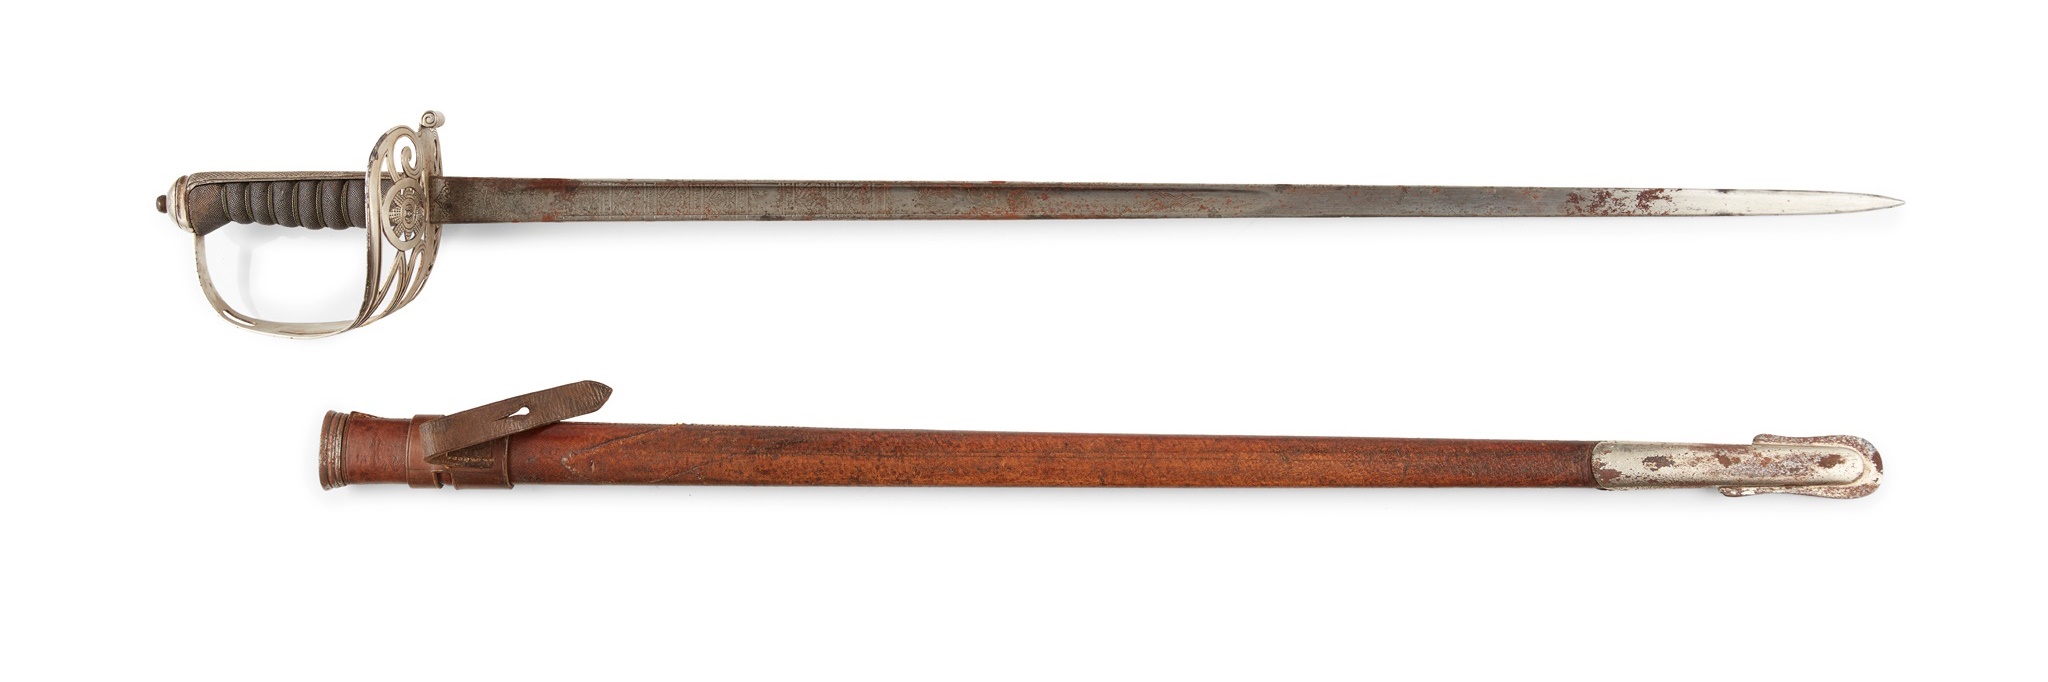 LOT 128 | TWO BRITISH REGIMENTAL OFFICERS SWORDS | LATE 19TH/ EARLY 20TH CENTURY | (2) the larger 102cm long | £300 - £500 + fees